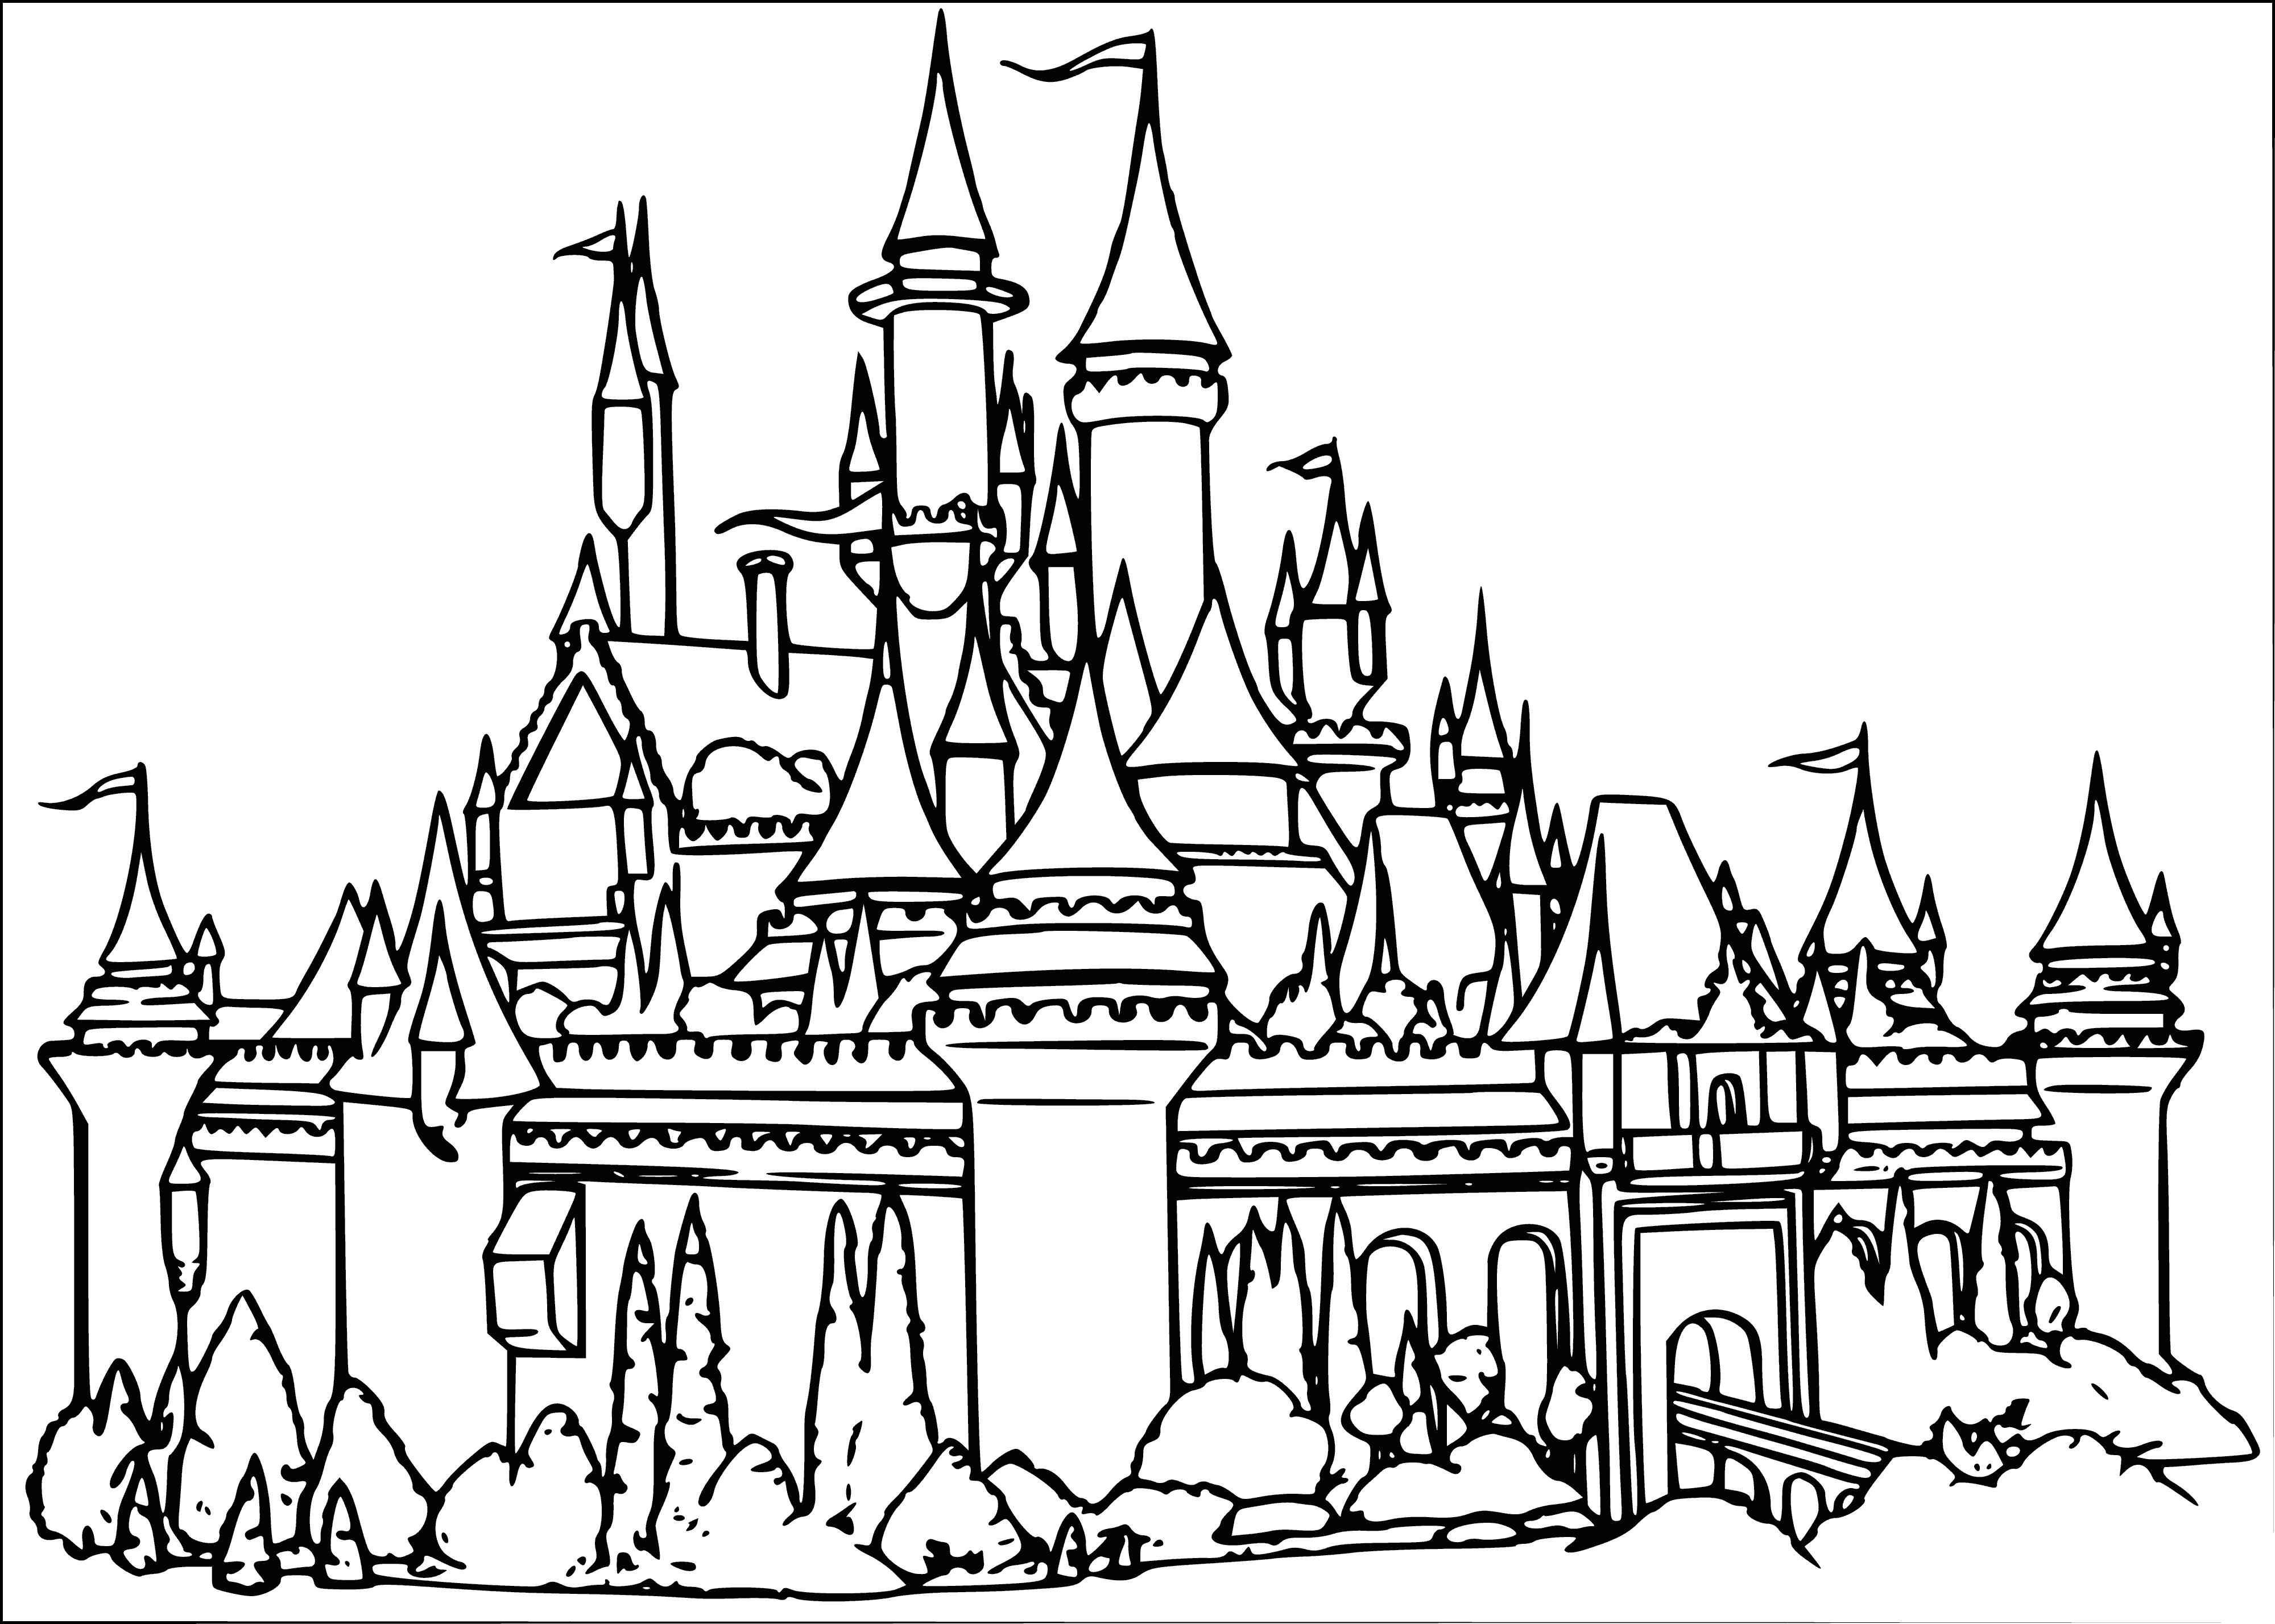 coloring page: A castle on a cliff, moat, thick stone walls, turrets, small windows w/bars, & big wooden door.